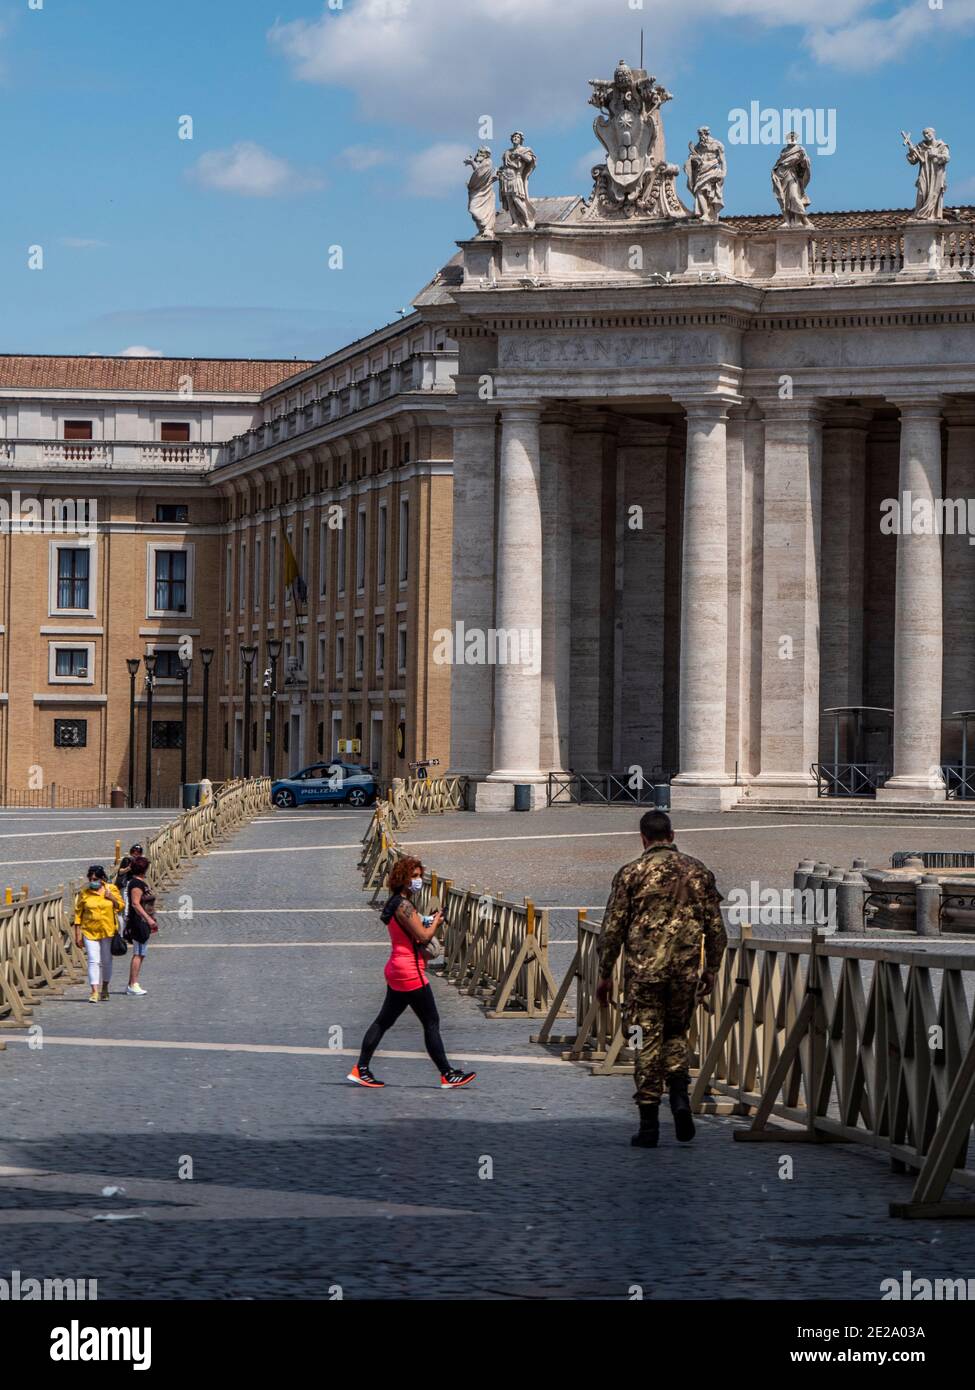 View of St. Peter's Basilica and St. peter's square at Vatican, Bernini's Colonnade Italy, Rome, Stock Photo